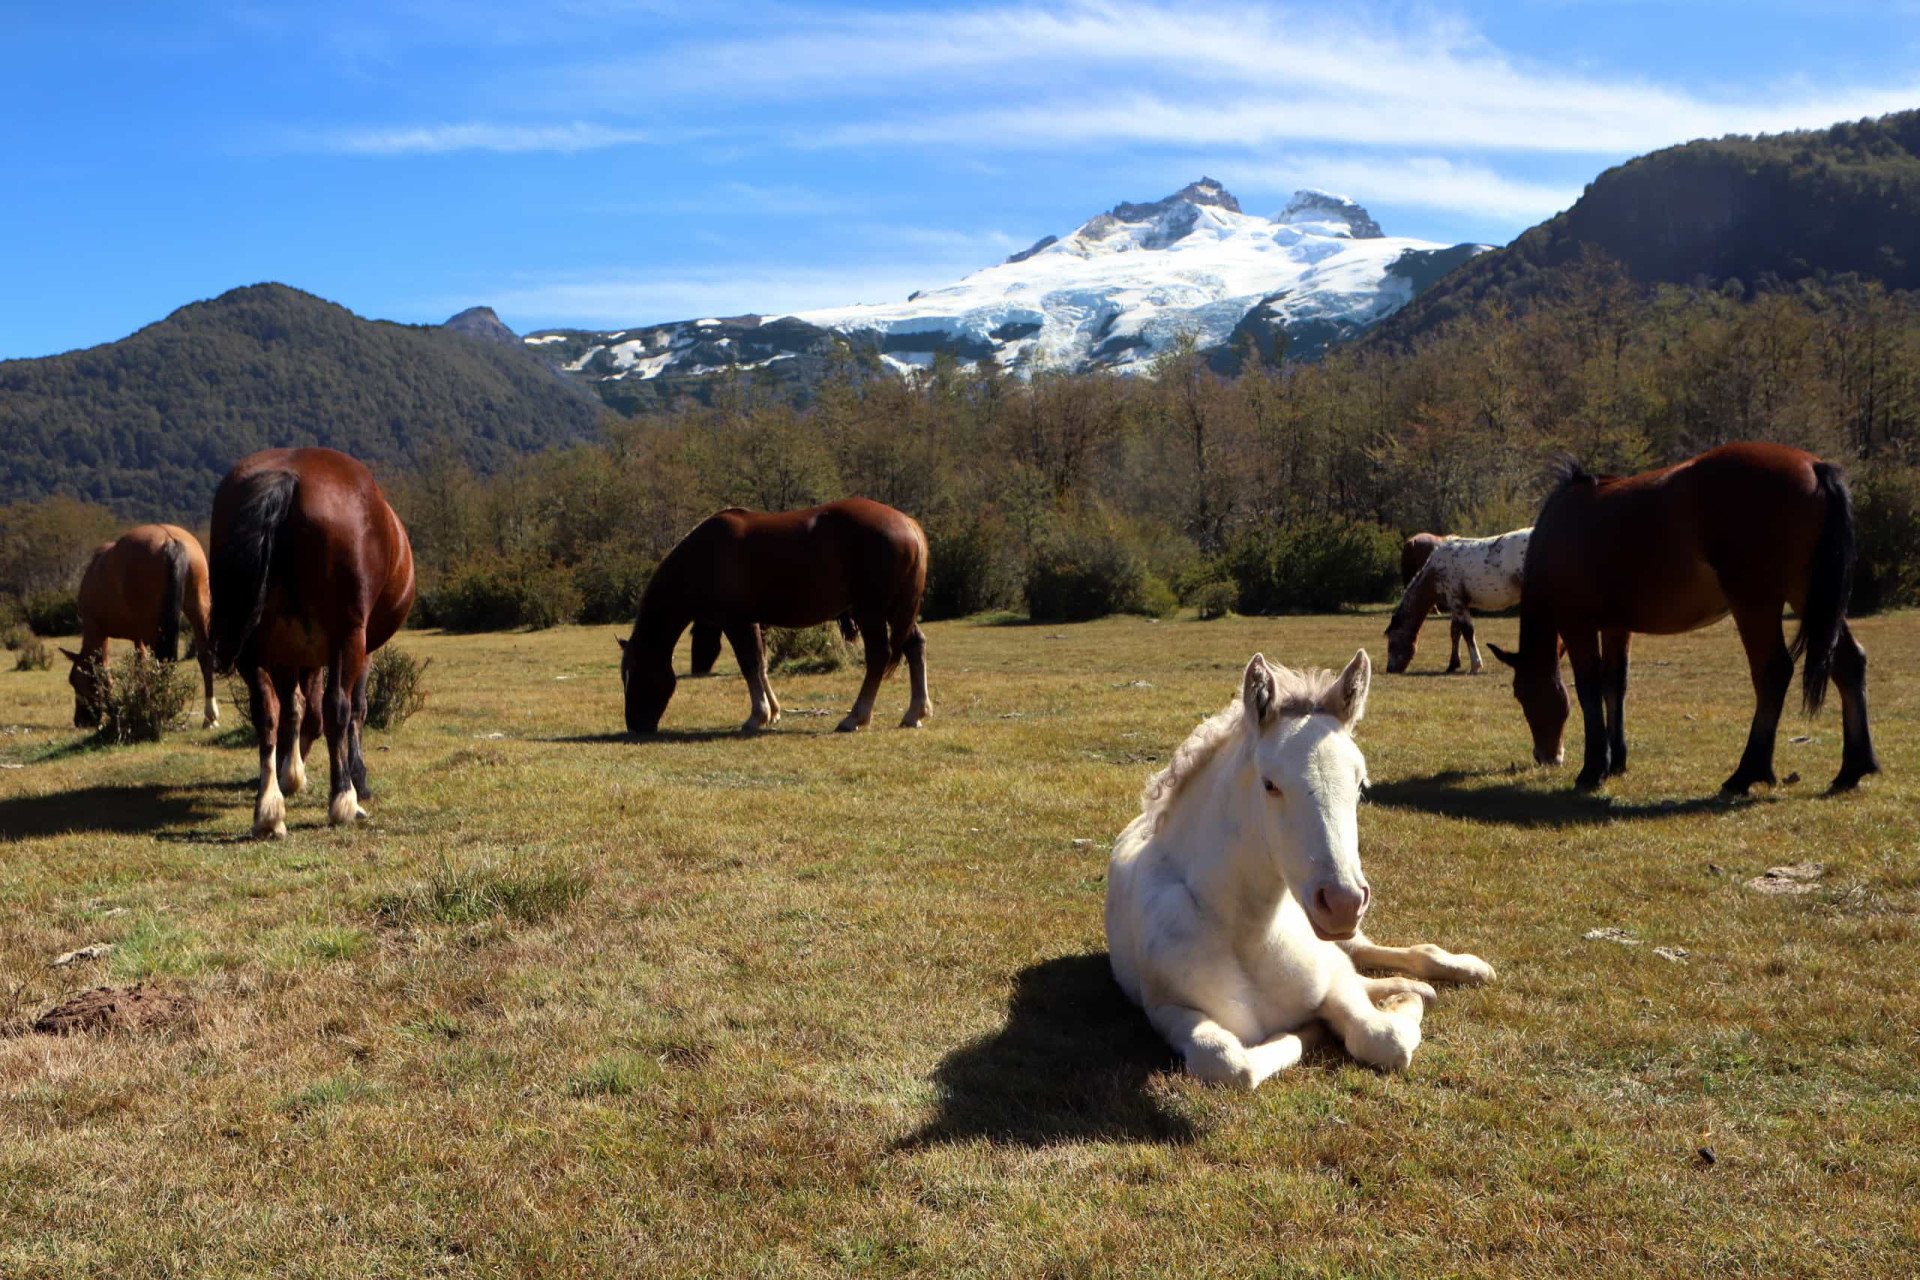 You can find your way around all the Patagonian <a href="https://www.starsinsider.com/travel/165784/the-longest-rivers-on-earth" rel="noopener">rivers</a>, lakes, and mountains on horseback. There is a big culture of horseback riding here, so don’t feel shy to ask the locals about it.<p><a href="https://www.msn.com/en-us/community/channel/vid-7xx8mnucu55yw63we9va2gwr7uihbxwc68fxqp25x6tg4ftibpra?cvid=94631541bc0f4f89bfd59158d696ad7e">Follow us and access great exclusive content every day</a></p>